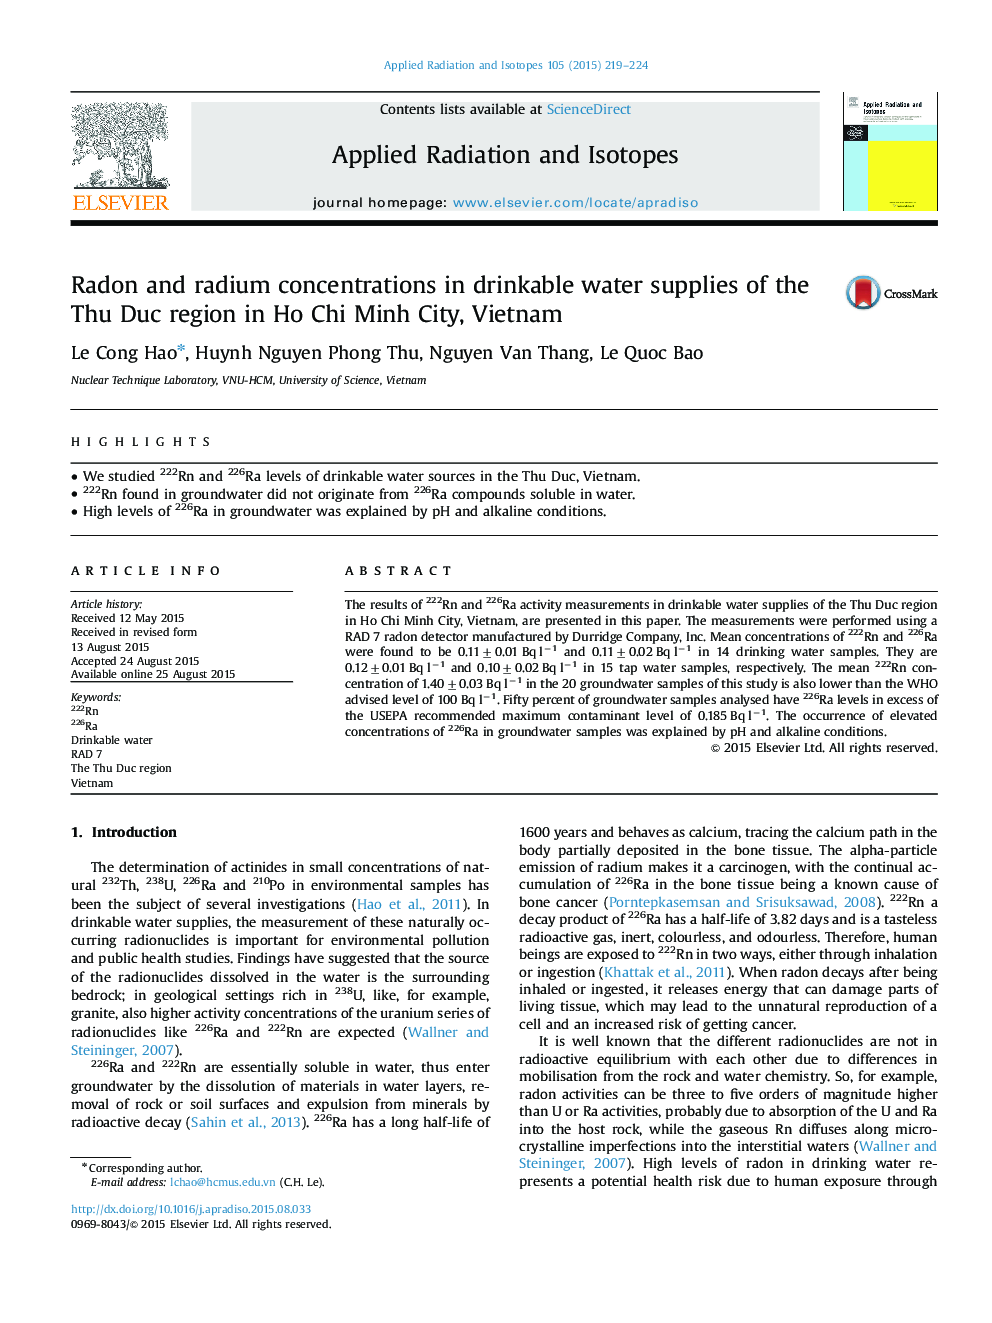 Radon and radium concentrations in drinkable water supplies of the Thu Duc region in Ho Chi Minh City, Vietnam